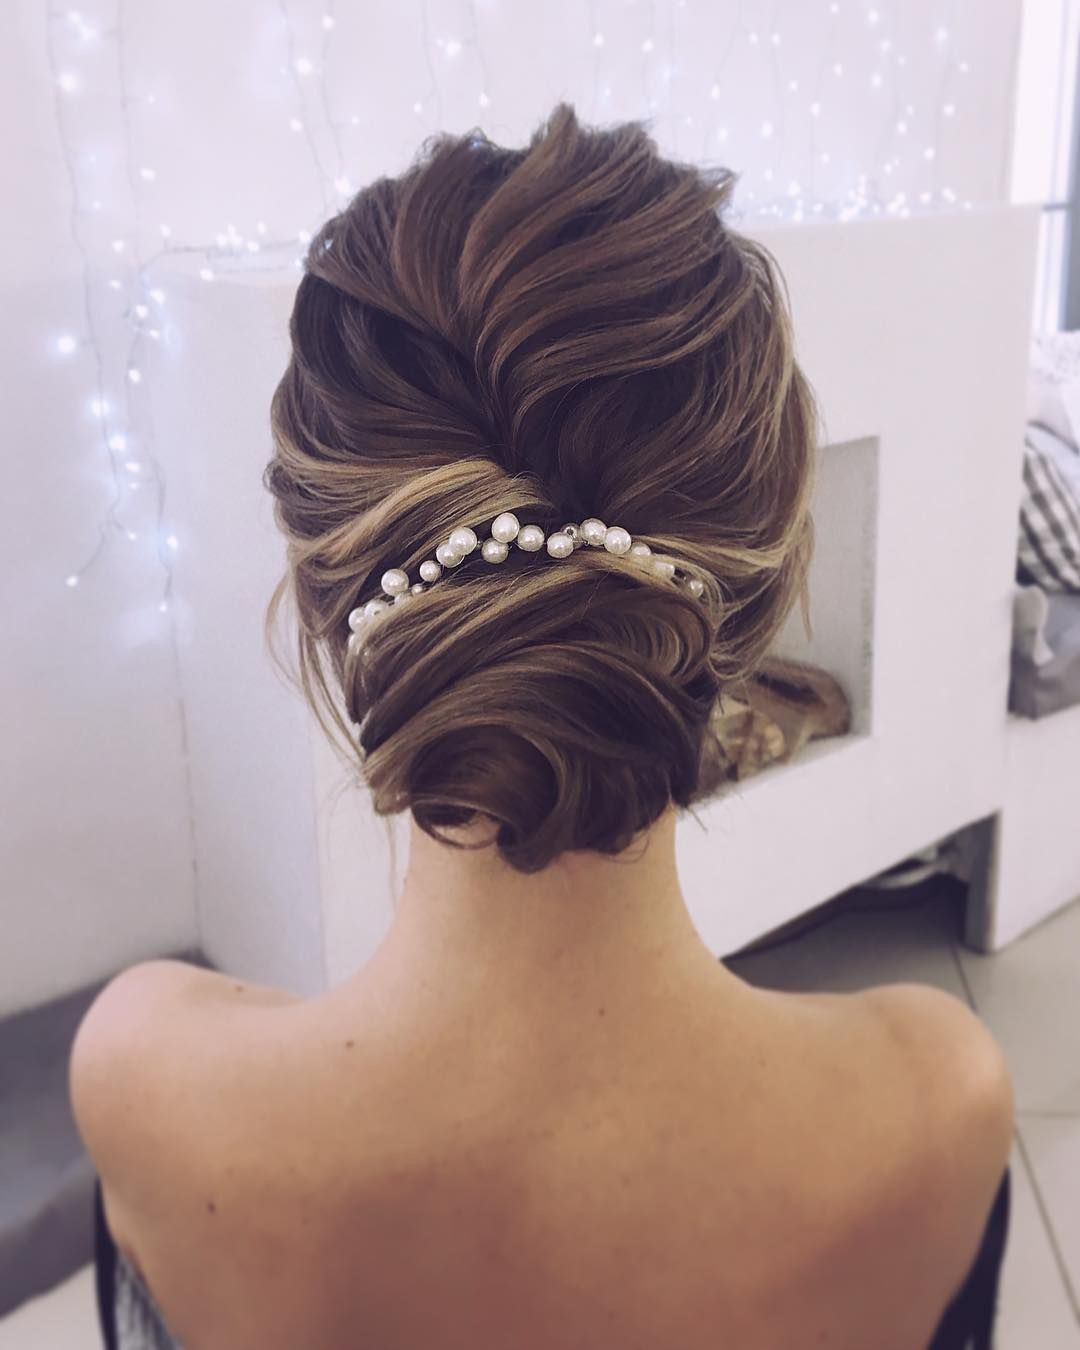 Classic Chignon Wedding Hairstyles
 Looking for gorgeous wedding hairstyle classic chignon